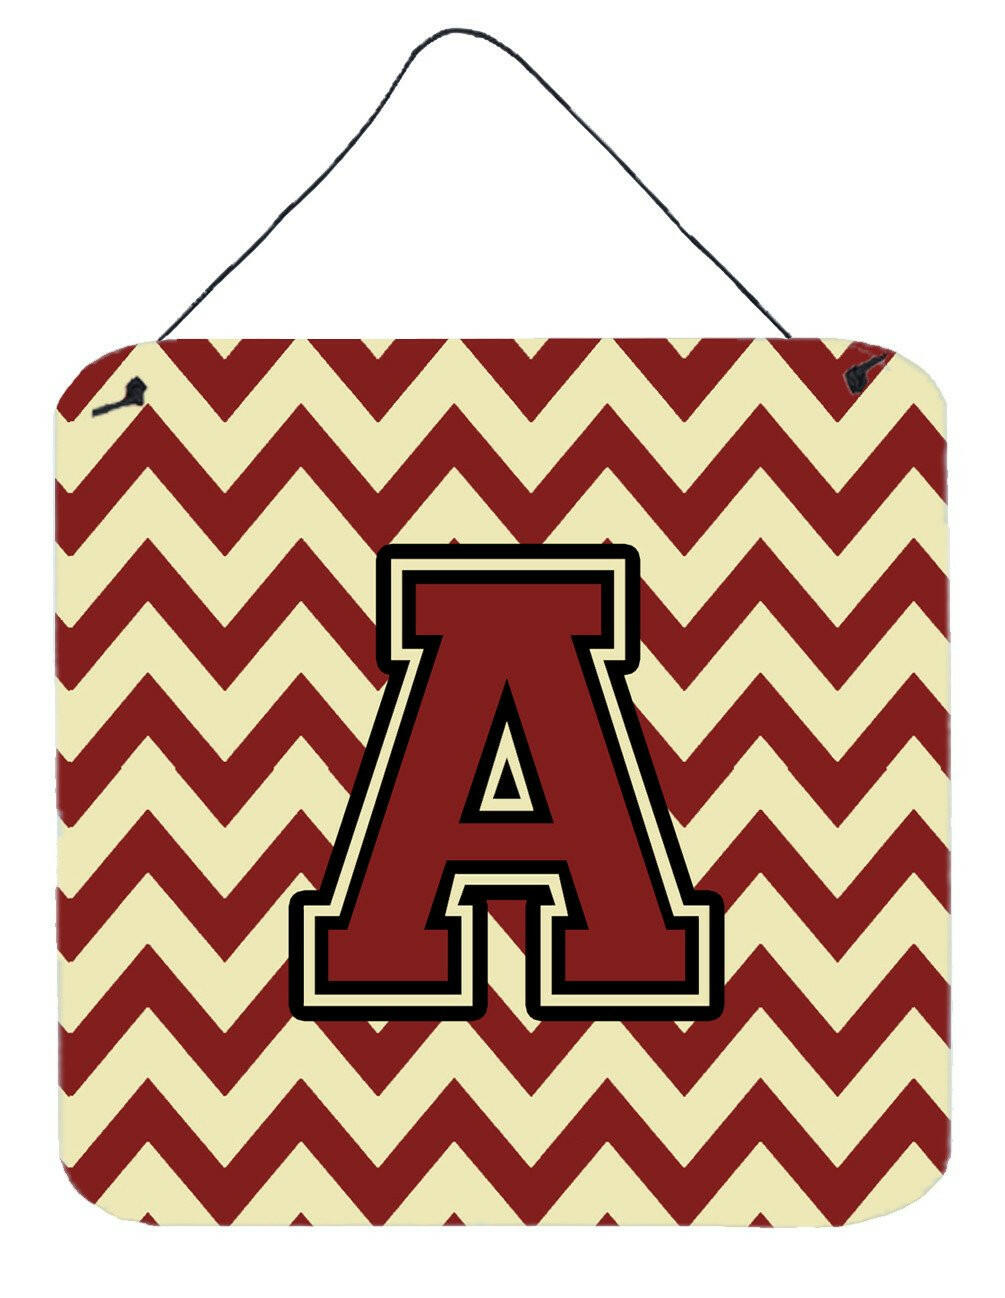 Letter A Chevron Maroon and Gold Wall or Door Hanging Prints CJ1061-ADS66 by Caroline's Treasures